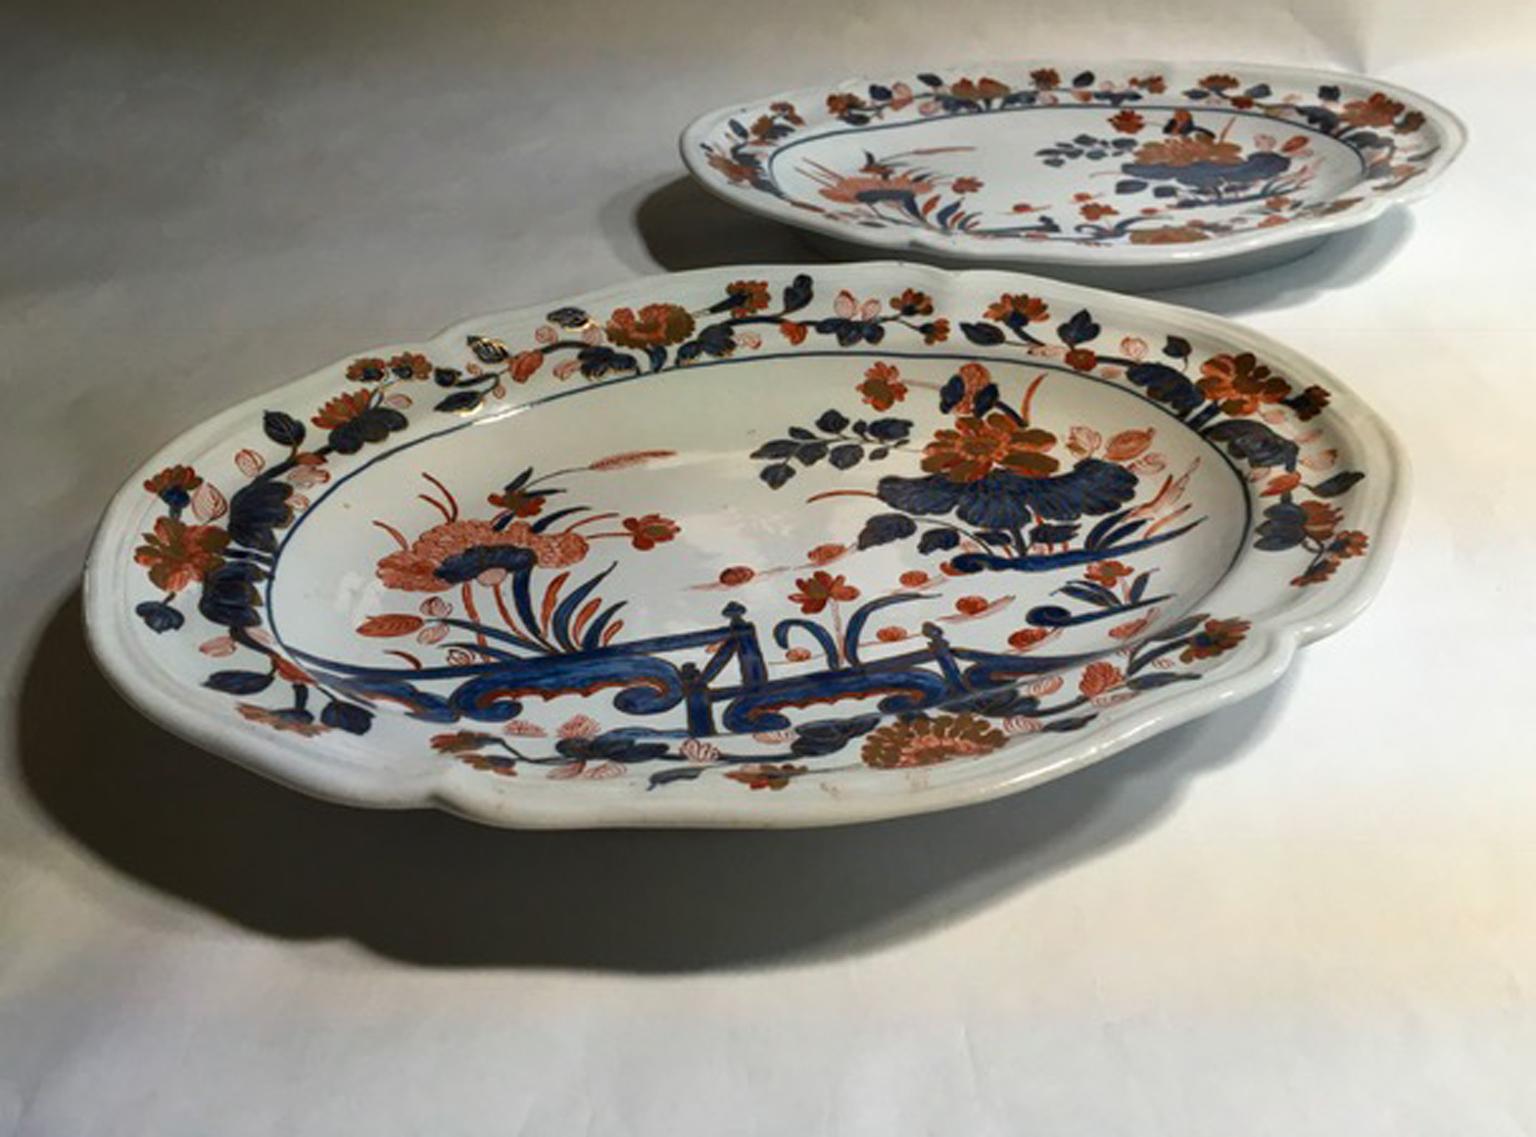 Italy Richard Ginori Mid-18th Century Pair of Porcelain Trays or Serving Dishes 8